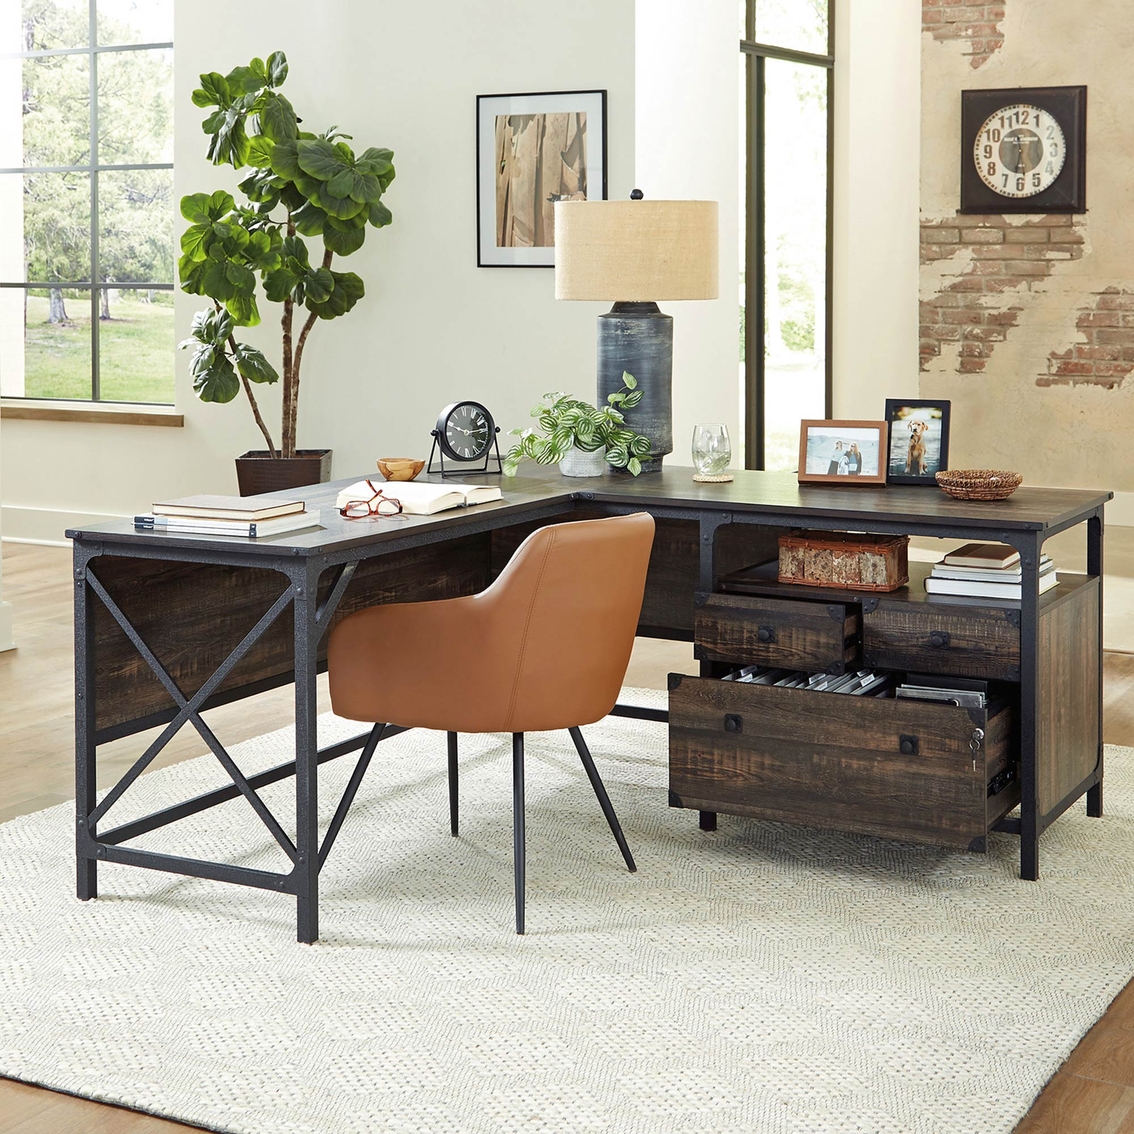 Sauder Wood and Metal L Desk with Drawers - Image 2 of 6